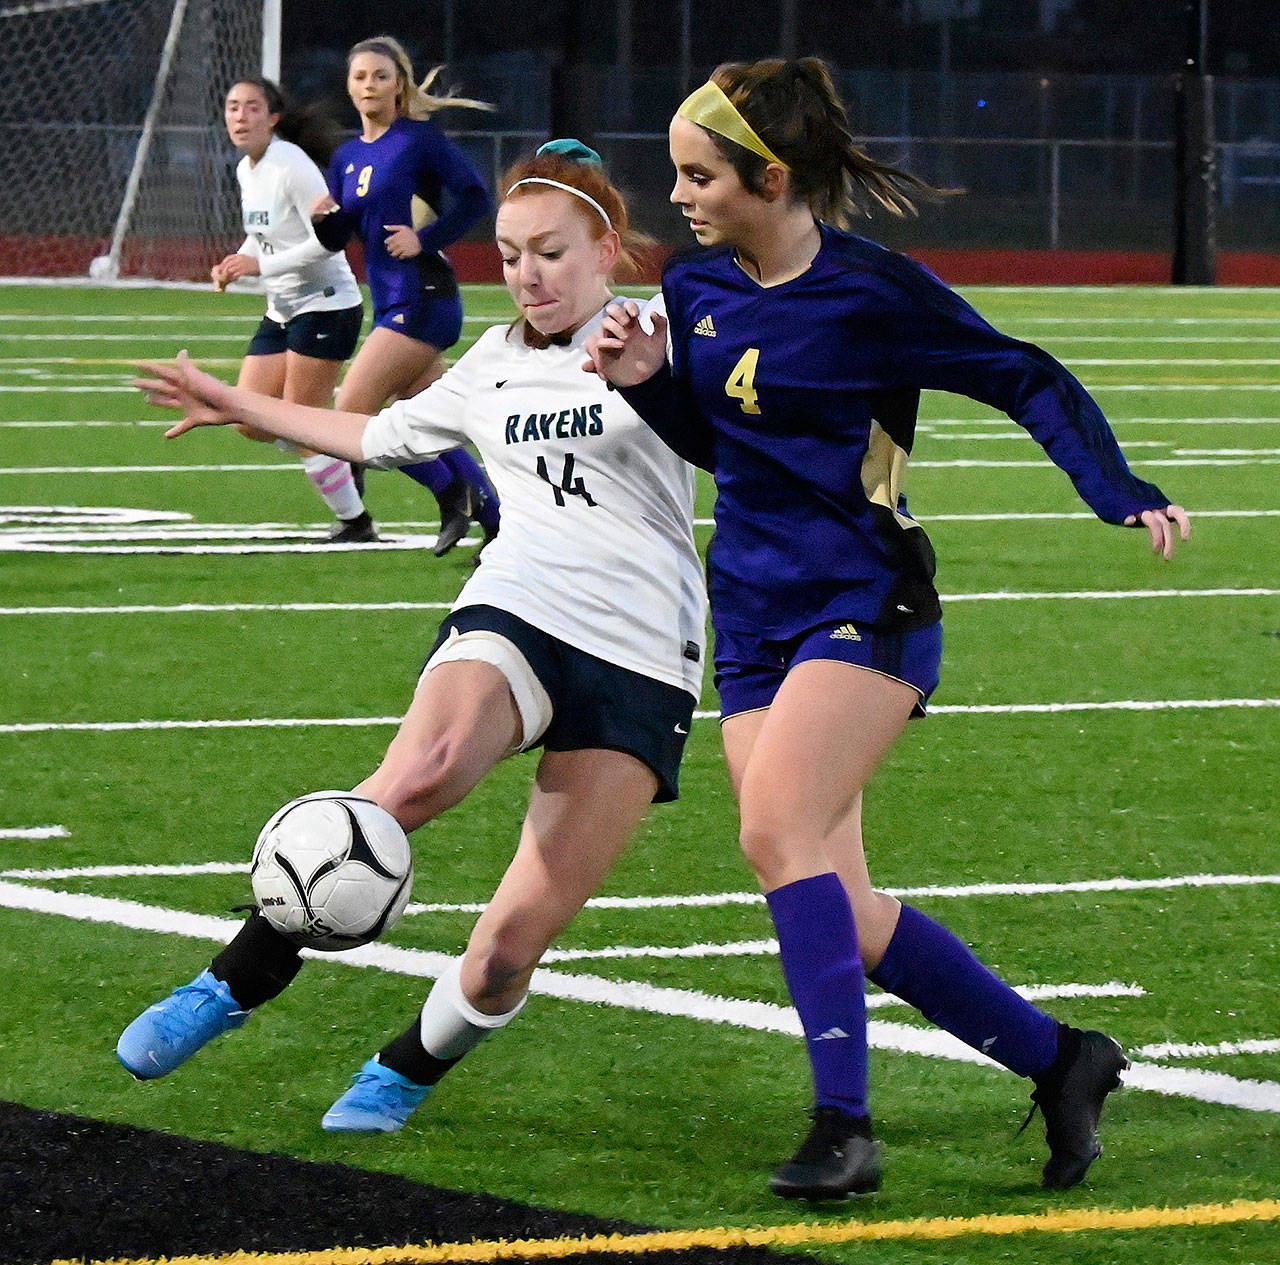 Auburn Riverside’s Sydney Wate, an all-league and all-state performer, dribbles the ball away from Puyallup’s Kaelee Huetten during the 4A championship match at Sparks Stadium on Nov.23. RACHEL CIAMPI, Auburn Reporter